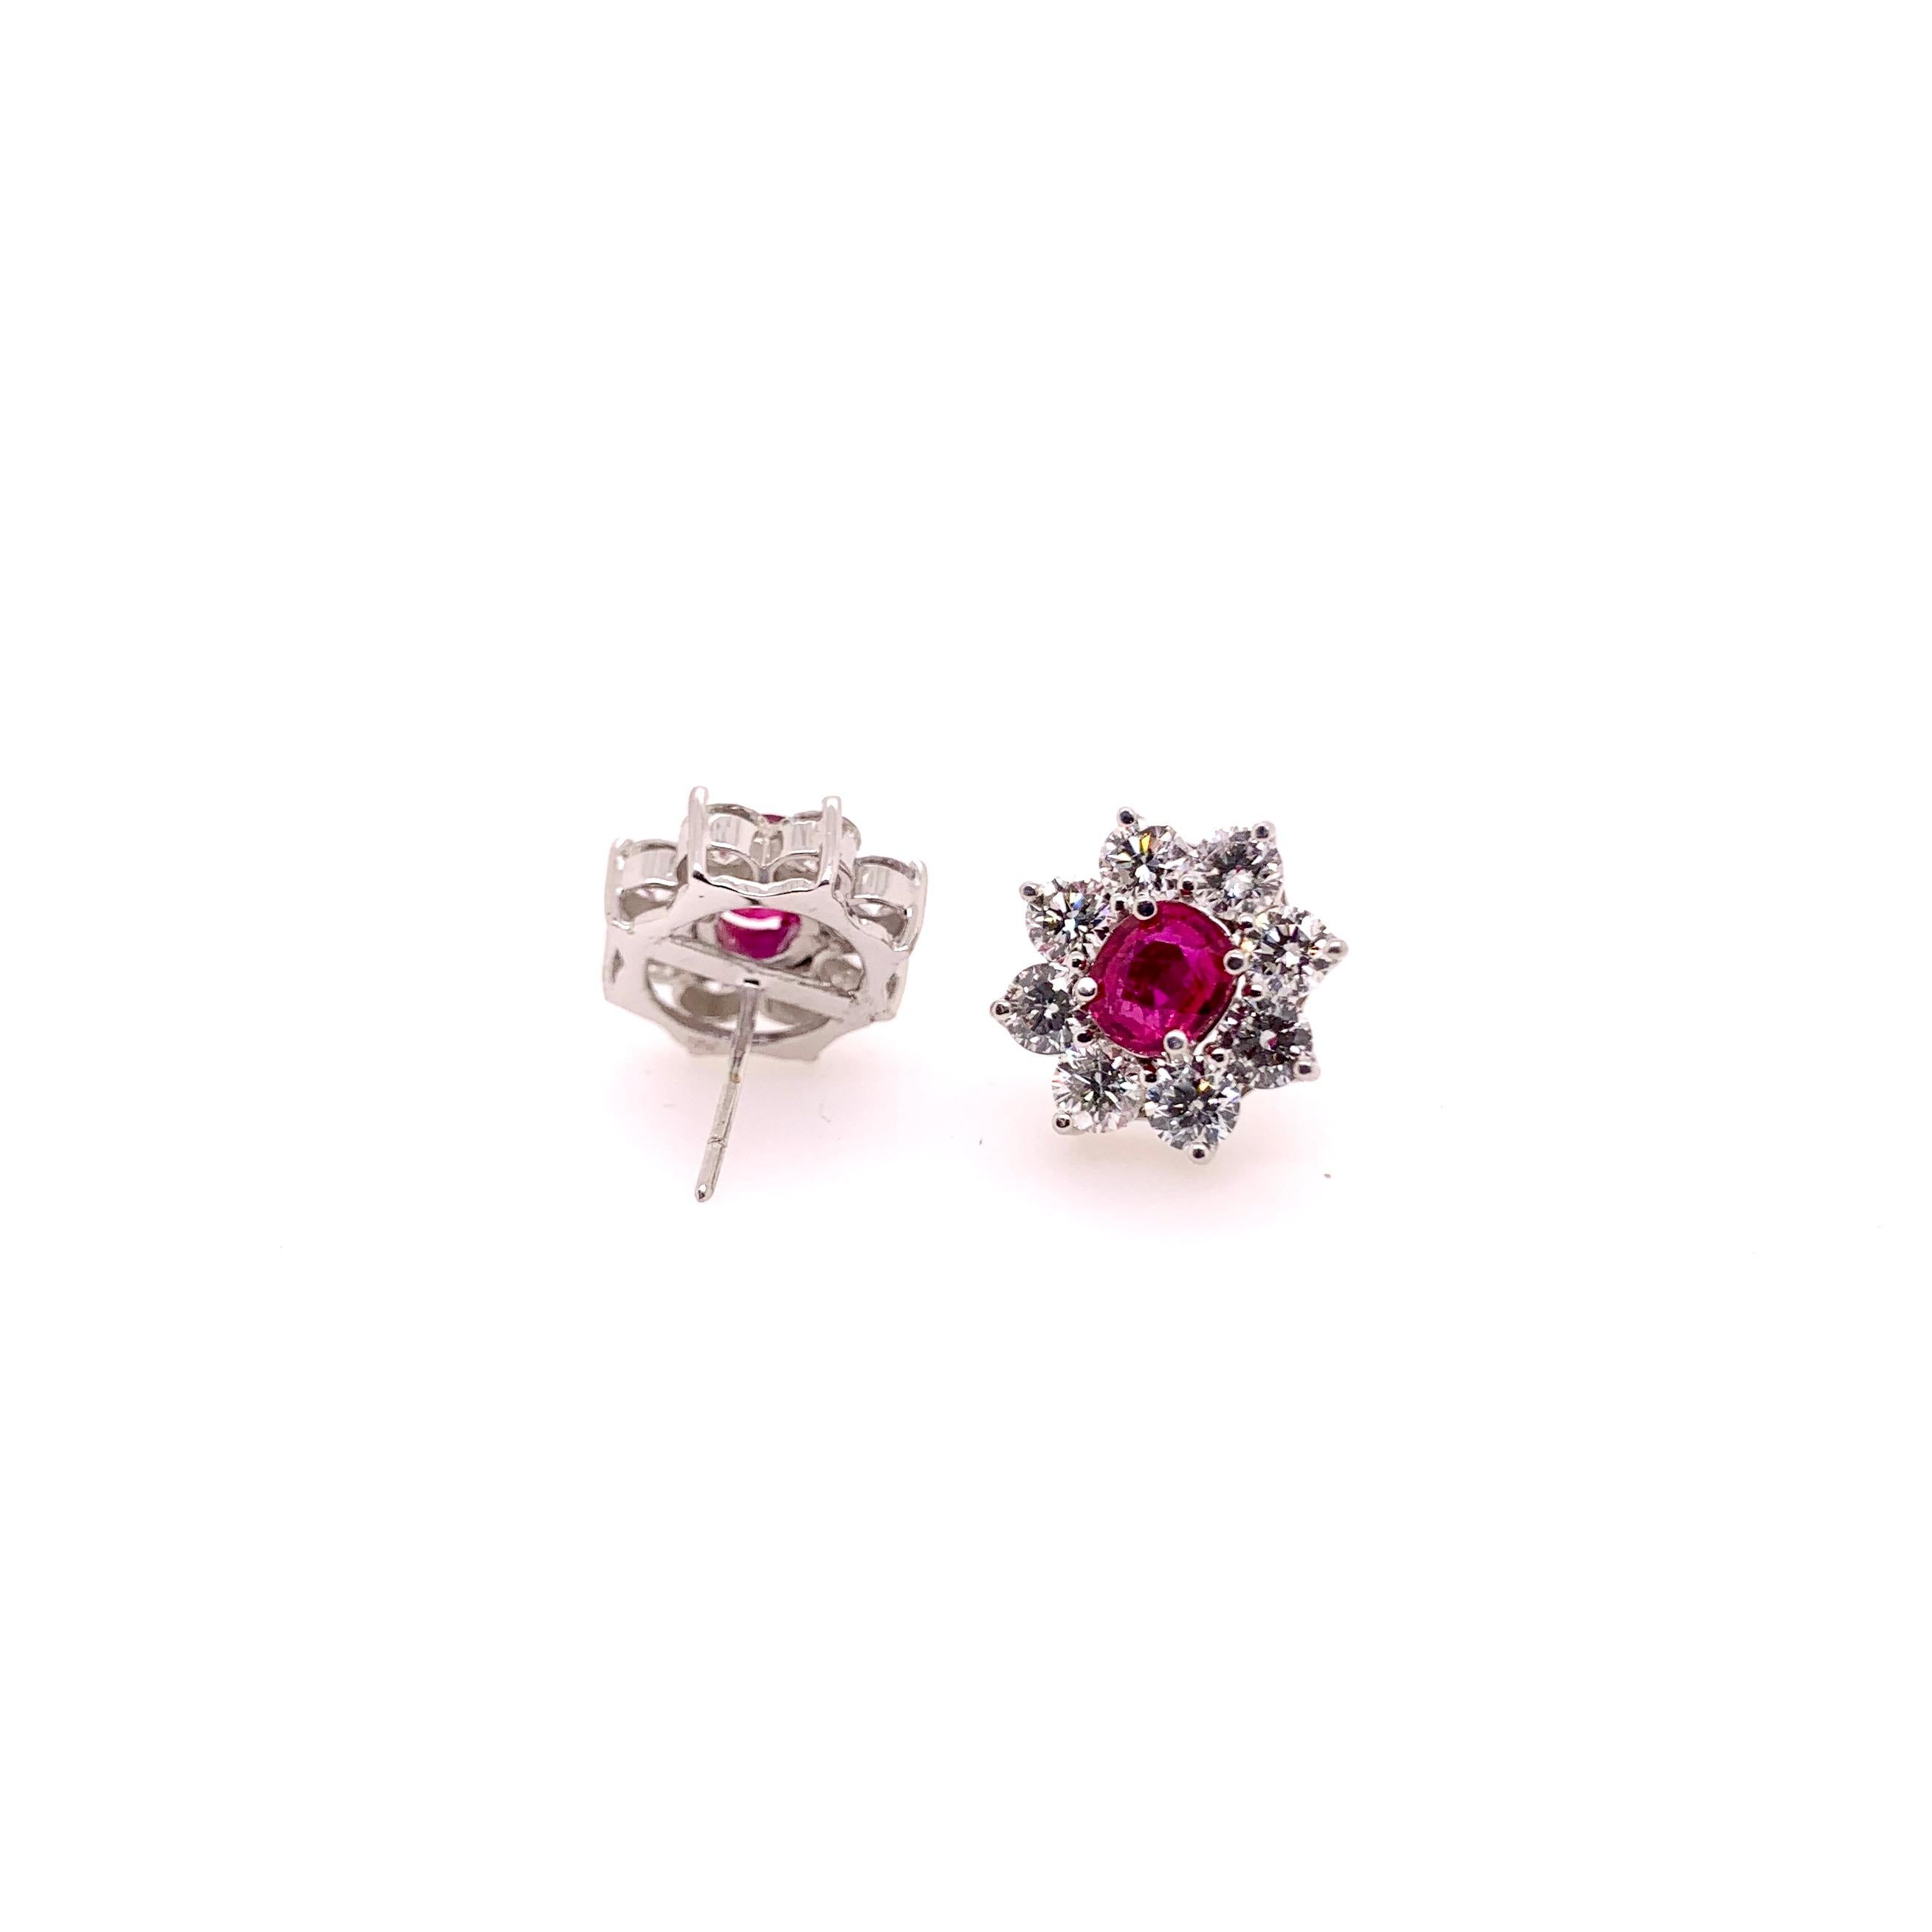 This iconic floral style ruby and diamond earrings are a must have in anyone's jewelry collection.  The rubies are well matched with it's stunning red rose hues and has generous size round brilliants that surround them.  This ultimate classic